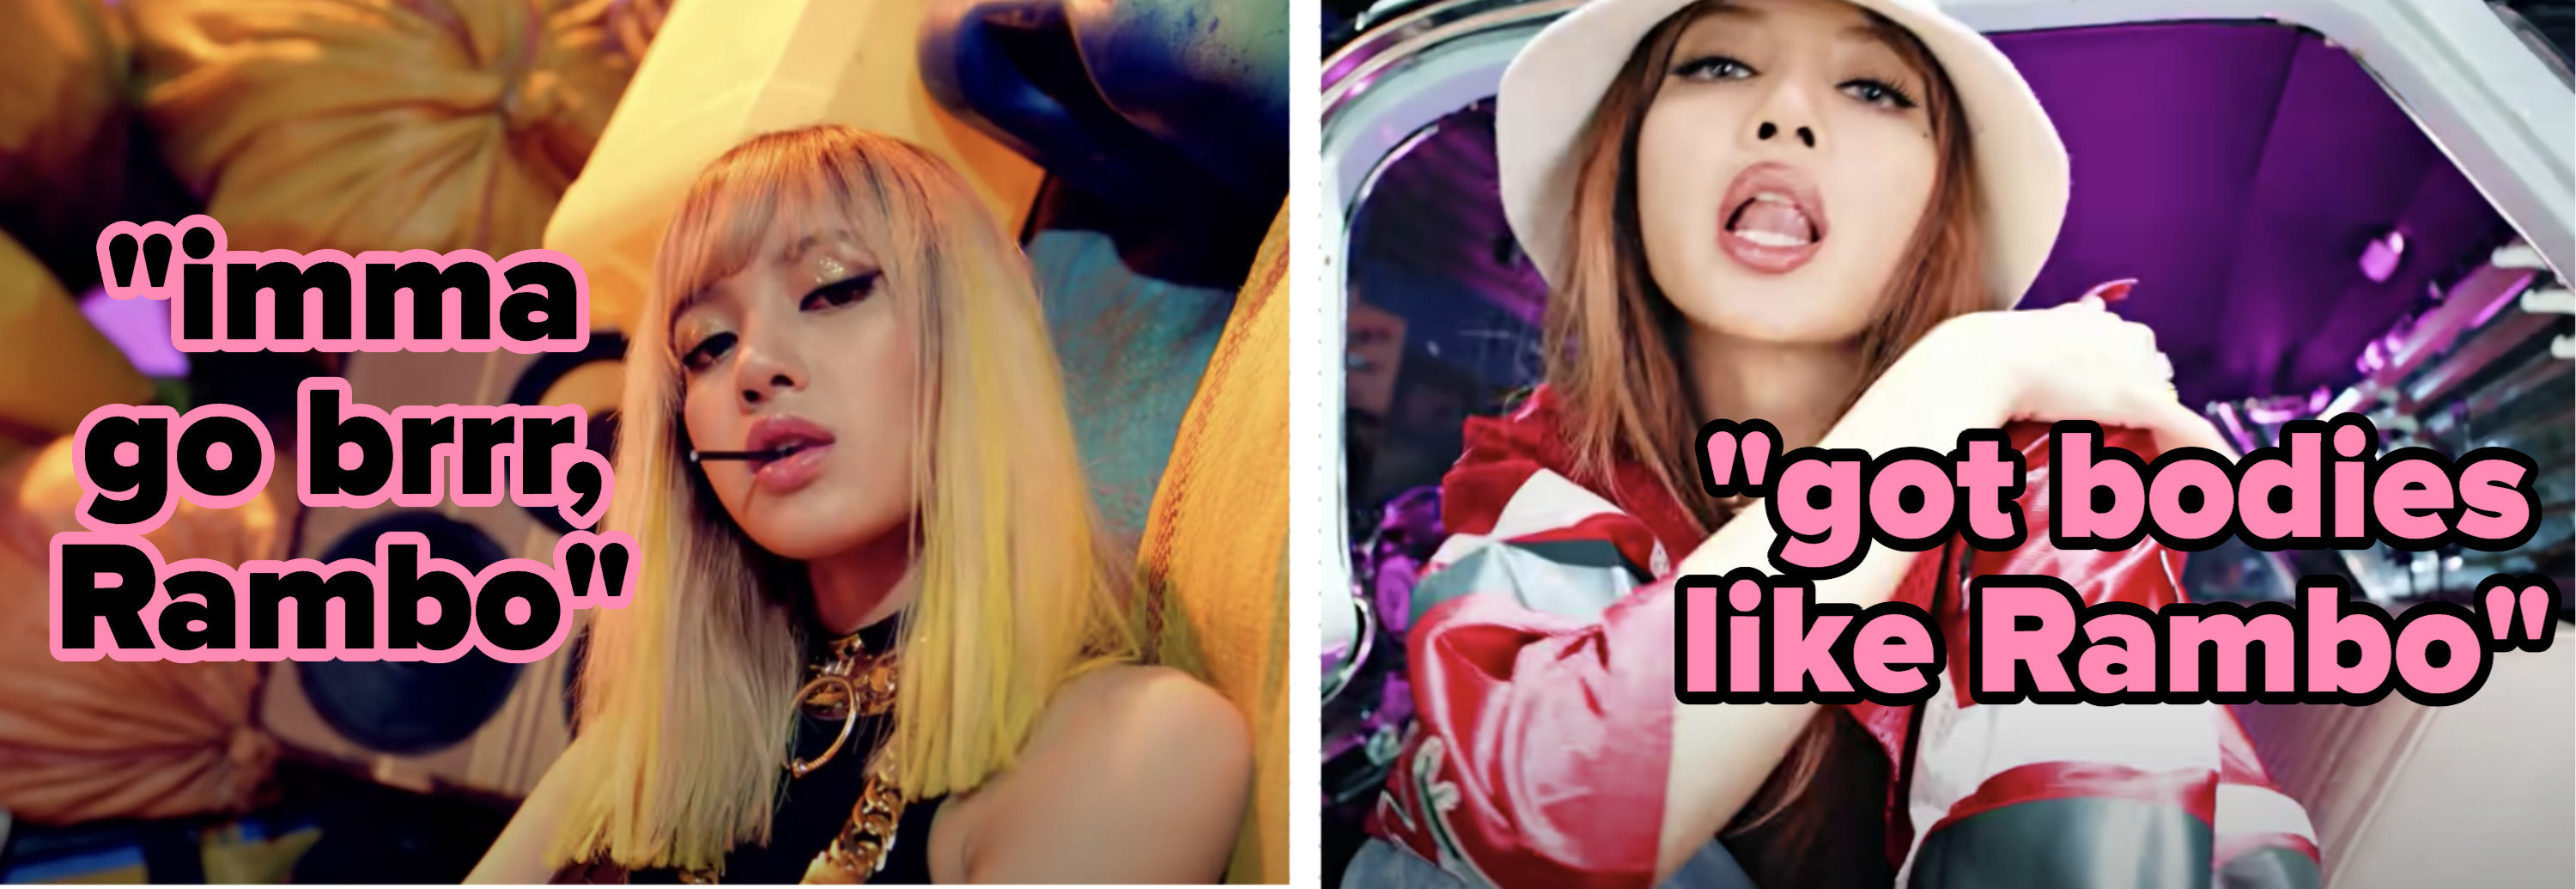 on the left an image of lisa from blackpink in the boombayah video. on the right an image of lisa from blackpink in the pink venom video.